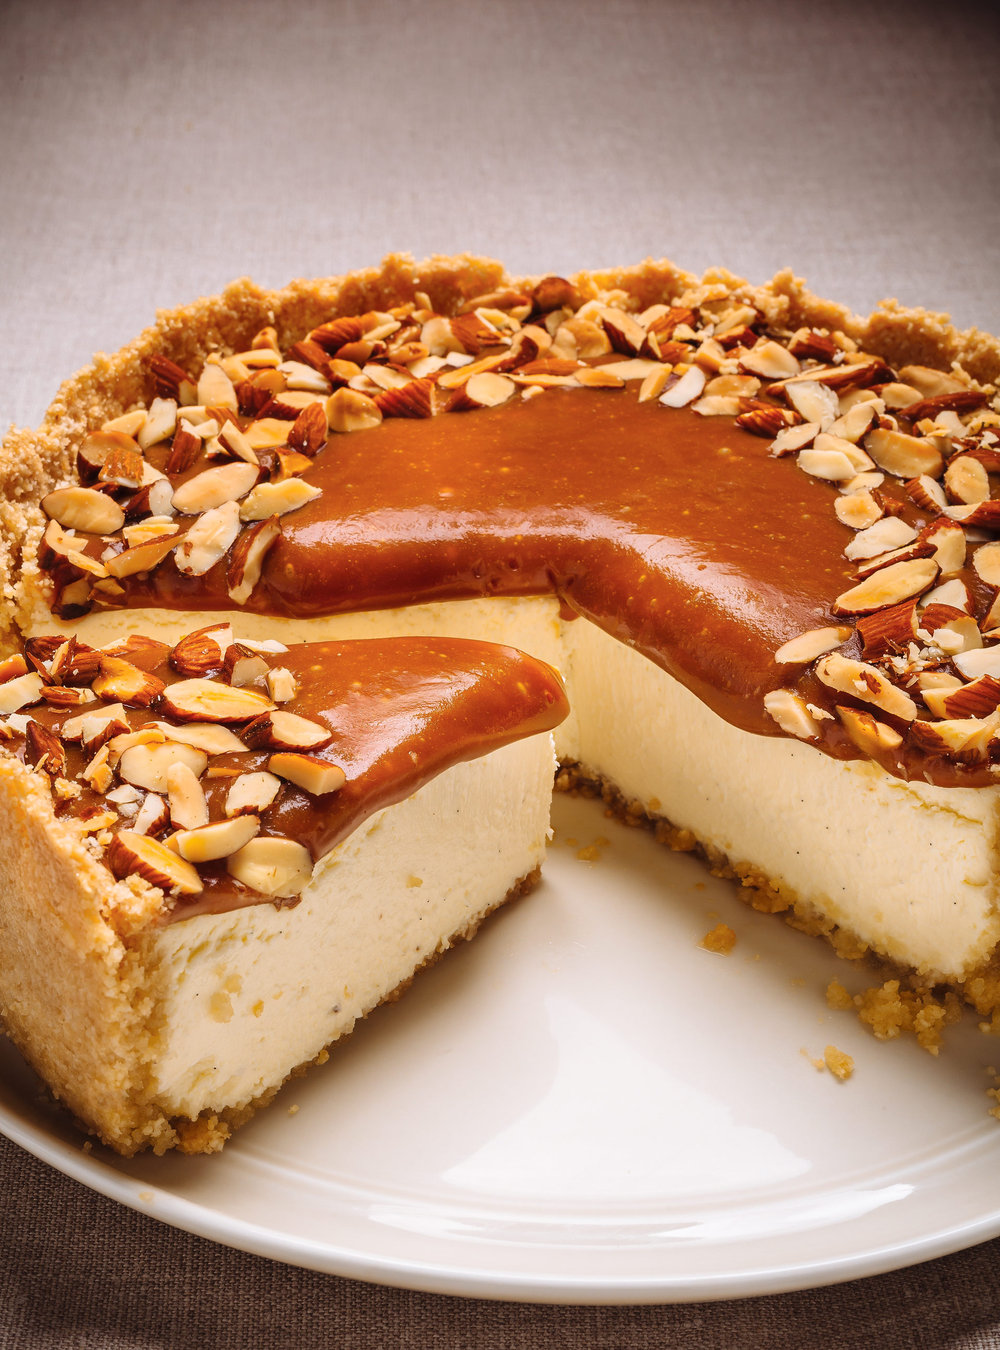 Caramel and Almond Cheesecake